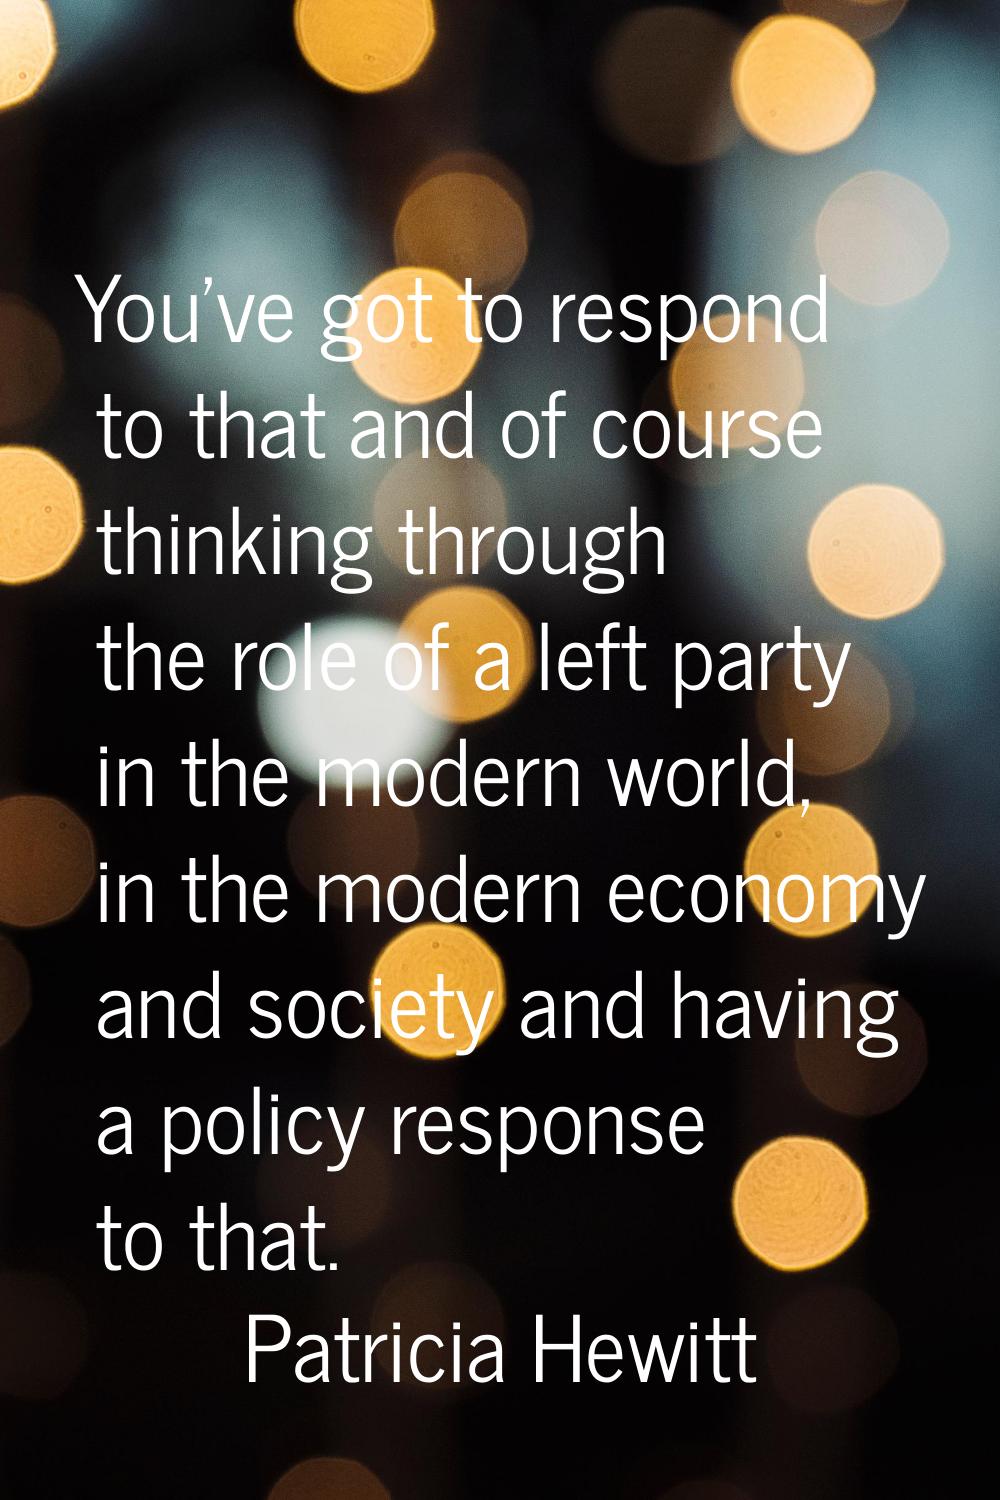 You've got to respond to that and of course thinking through the role of a left party in the modern